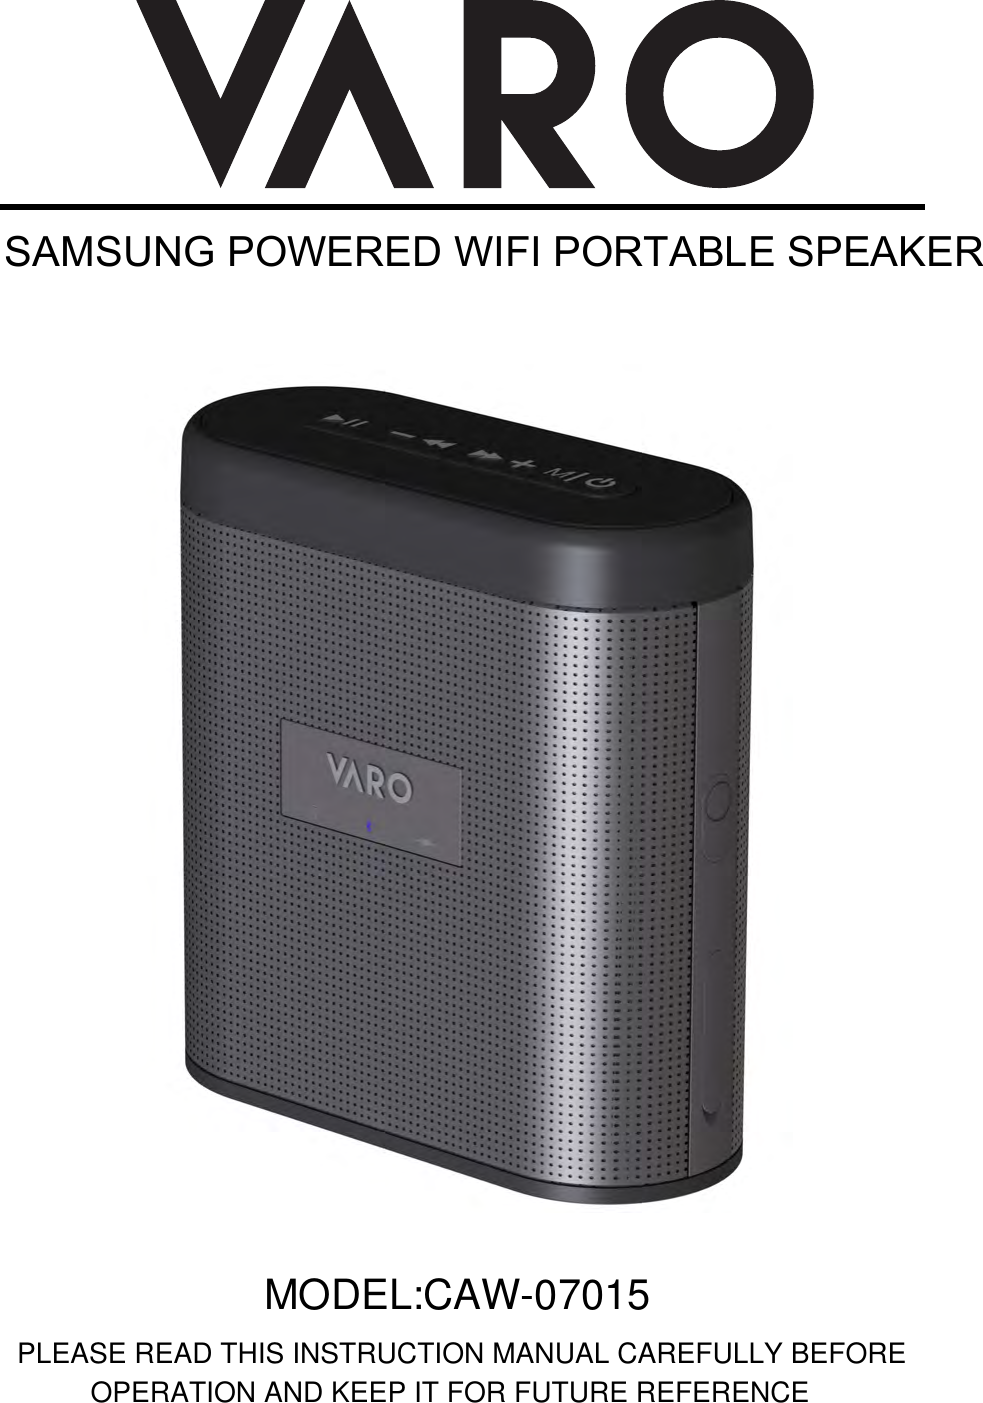 SAMSUNG POWERED WIFI PORTABLE SPEAKER  MODEL:CAW-07015PLEASE READ THIS INSTRUCTION MANUAL CAREFULLY BEFORE OPERATION AND KEEP IT FOR FUTURE REFERENCE 